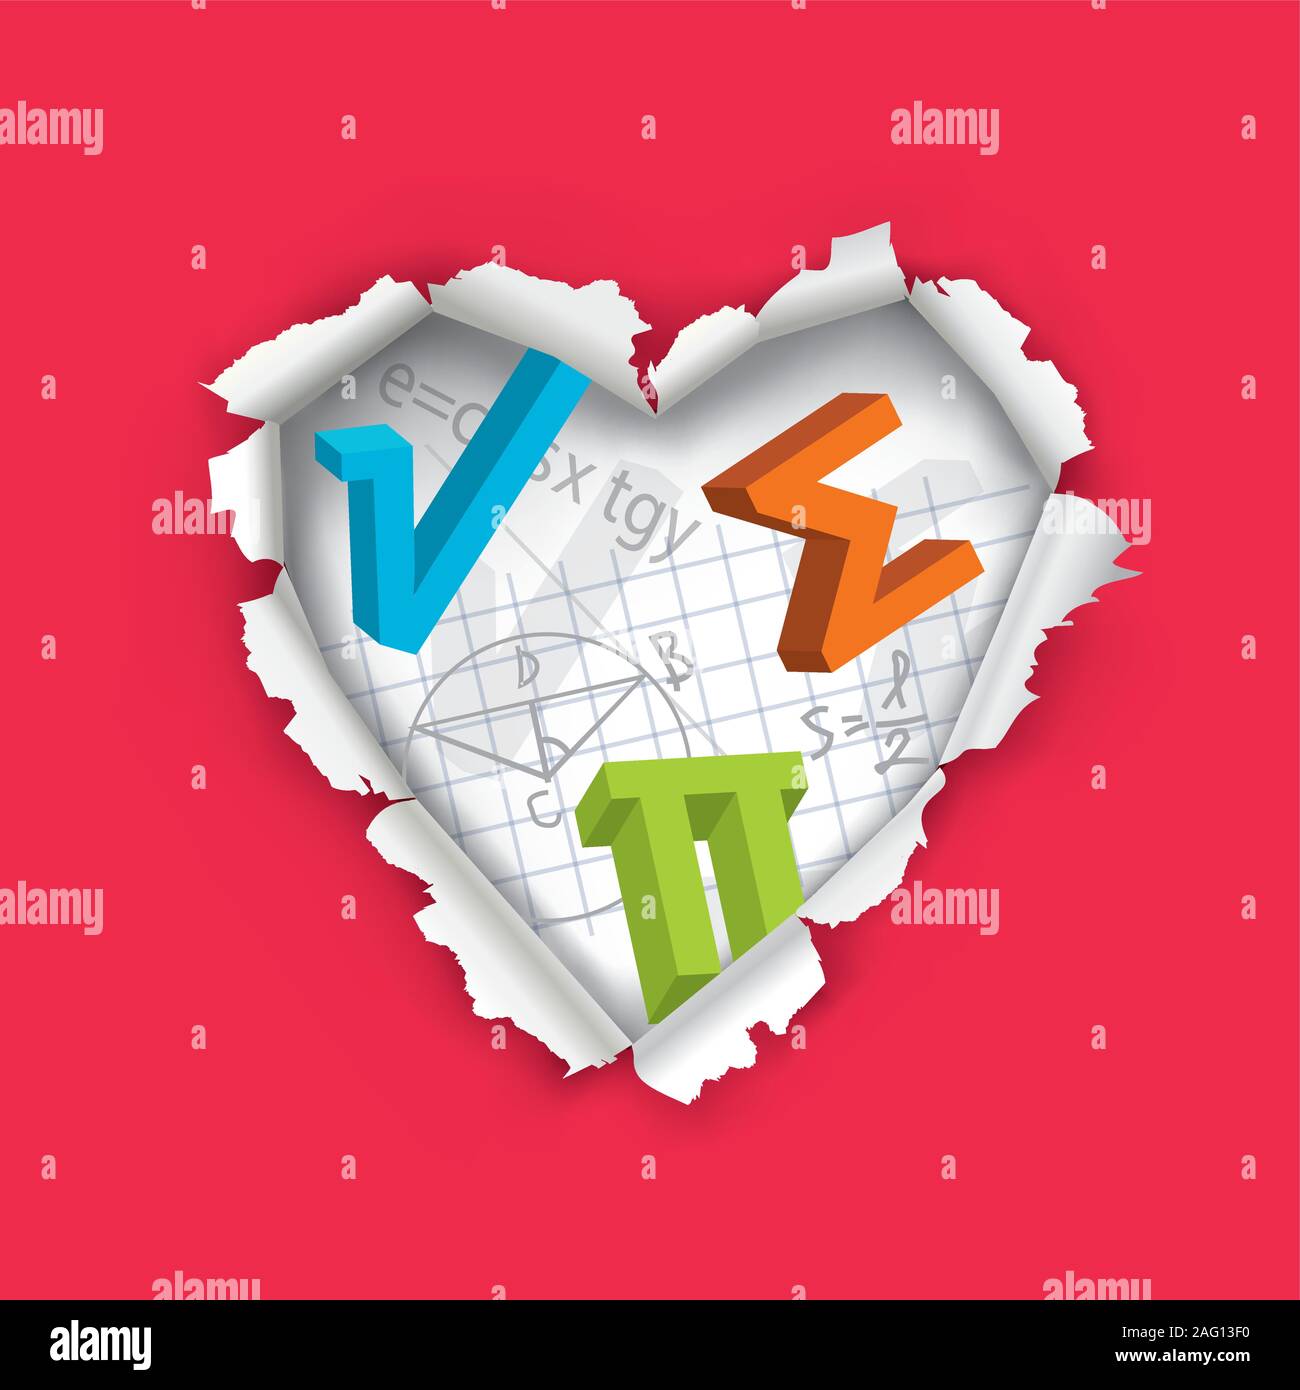 Ilove math, Mathematics education concept. Illustration of a hole in paper in the shape of heart with mathematics symbols and notes.Vector available Stock Vector